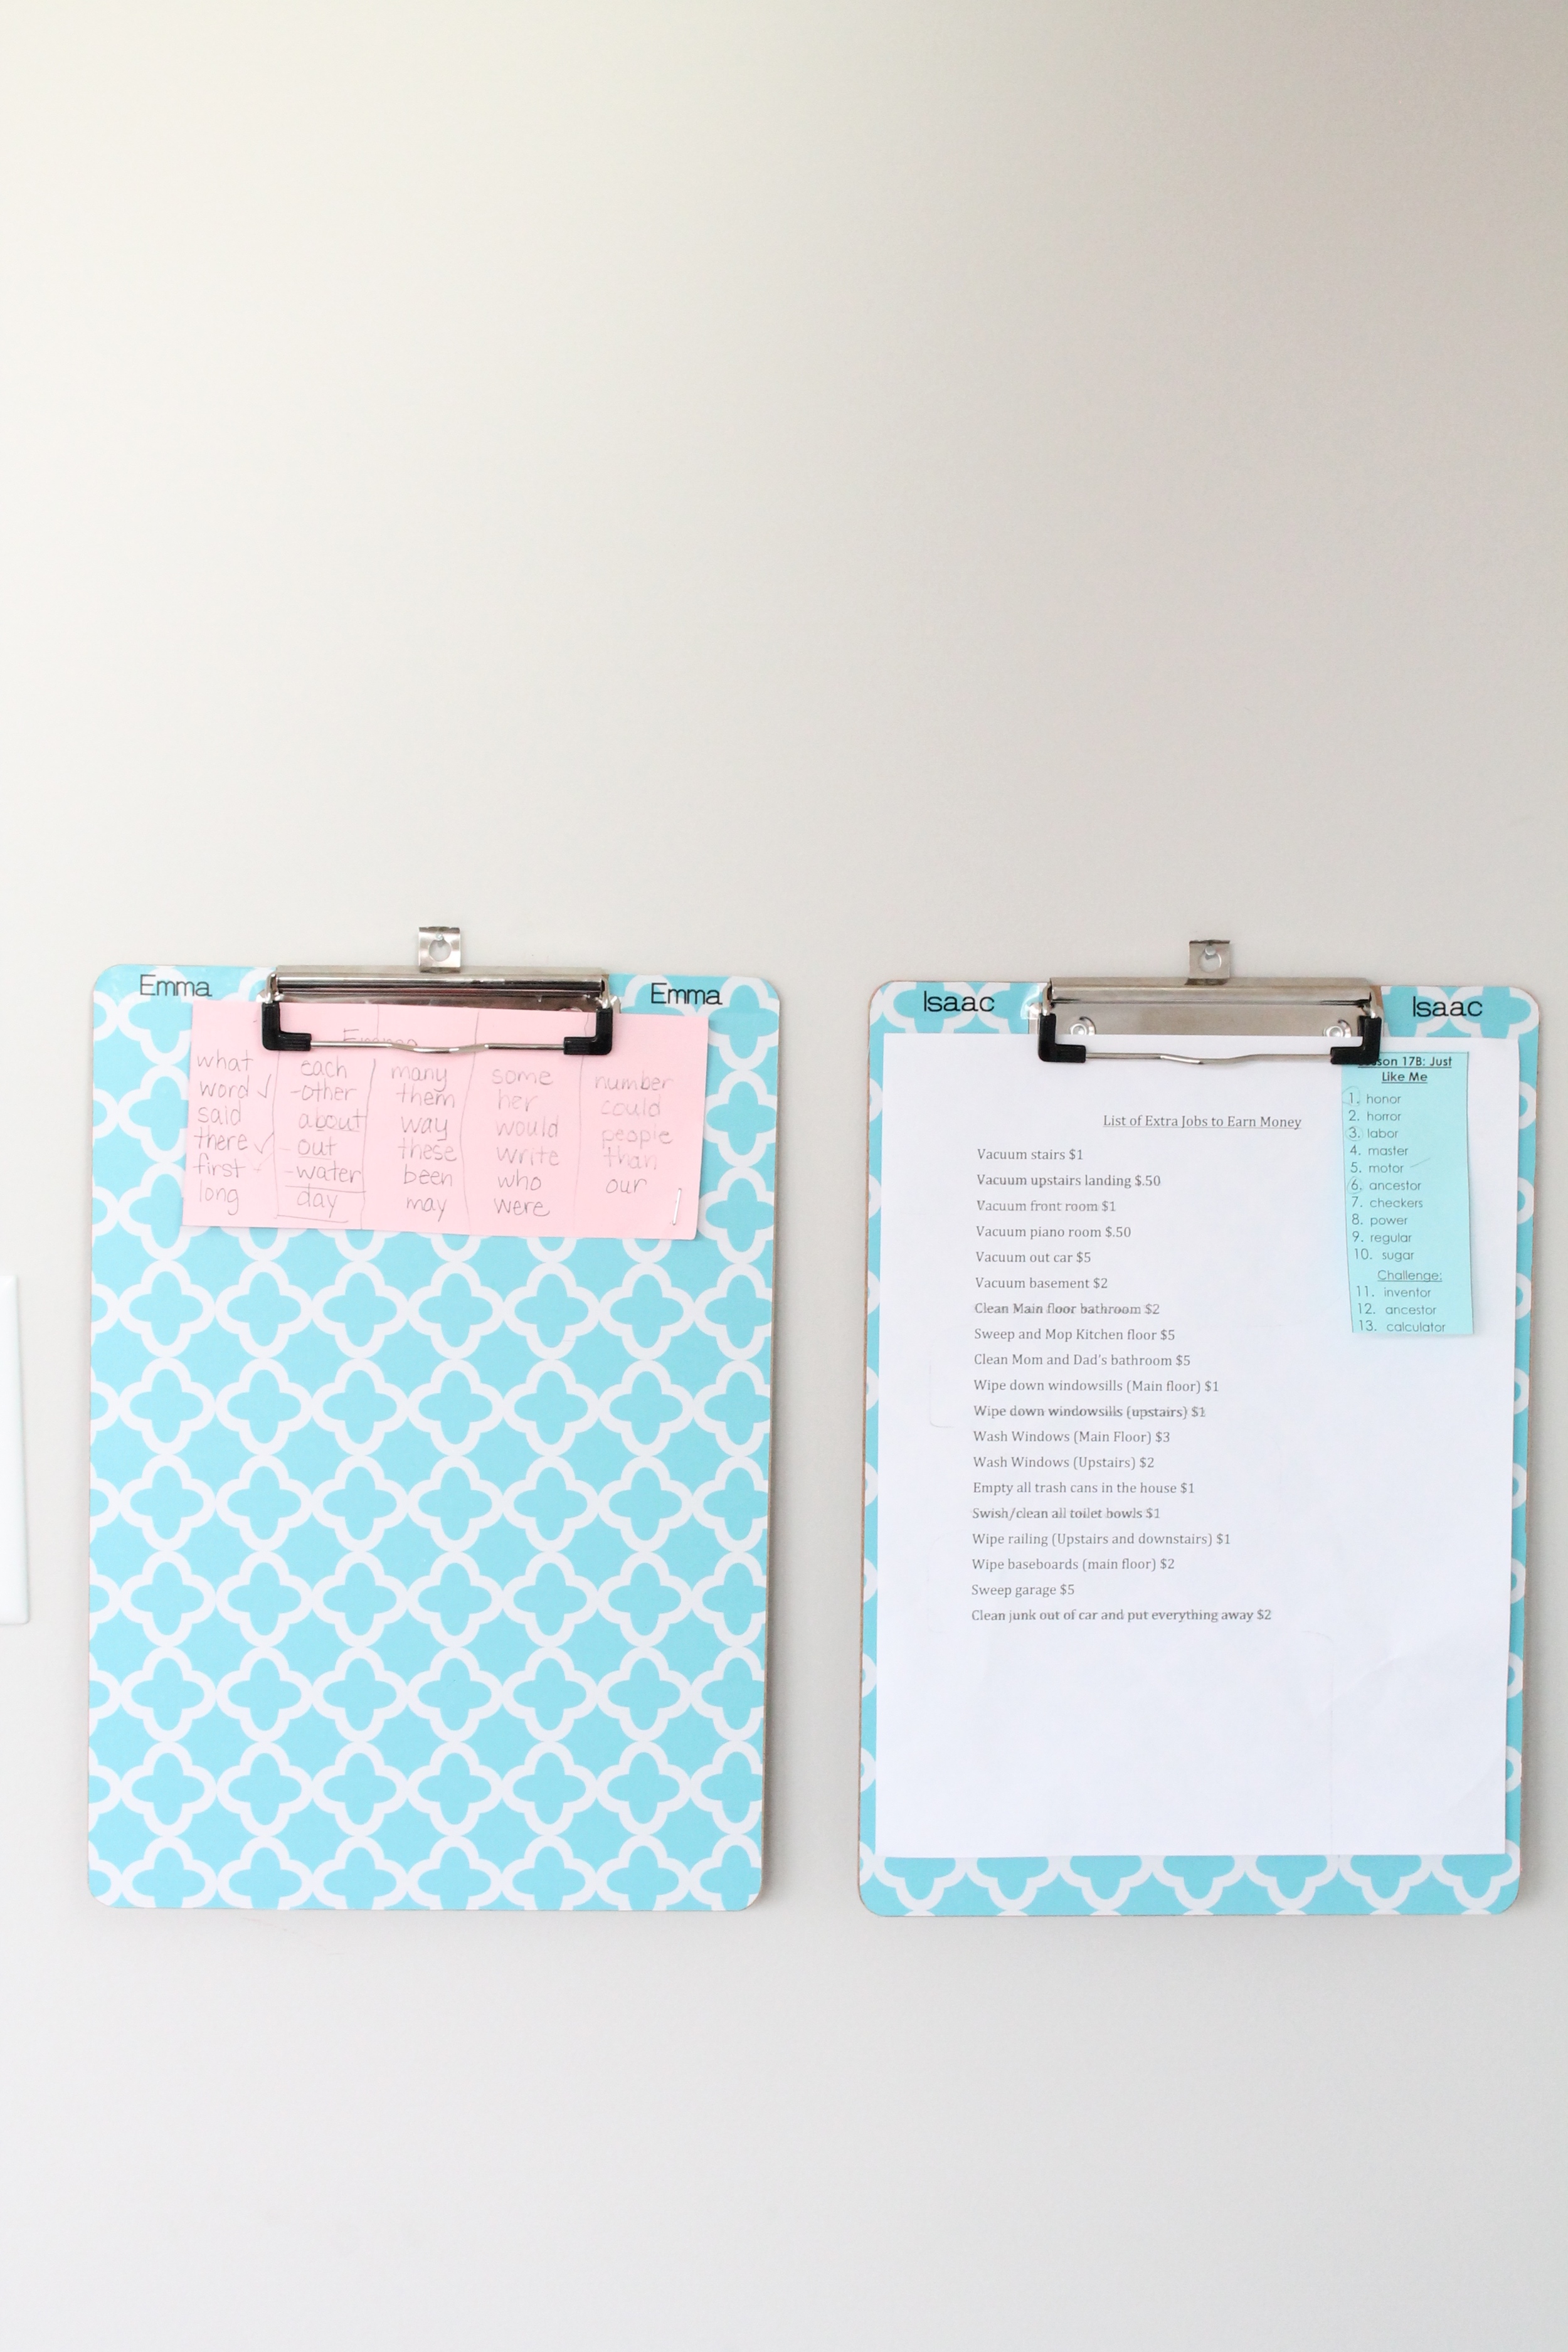 Homework clipboards in the kitchen. Keep spelling lists and other homework accessible and organized.